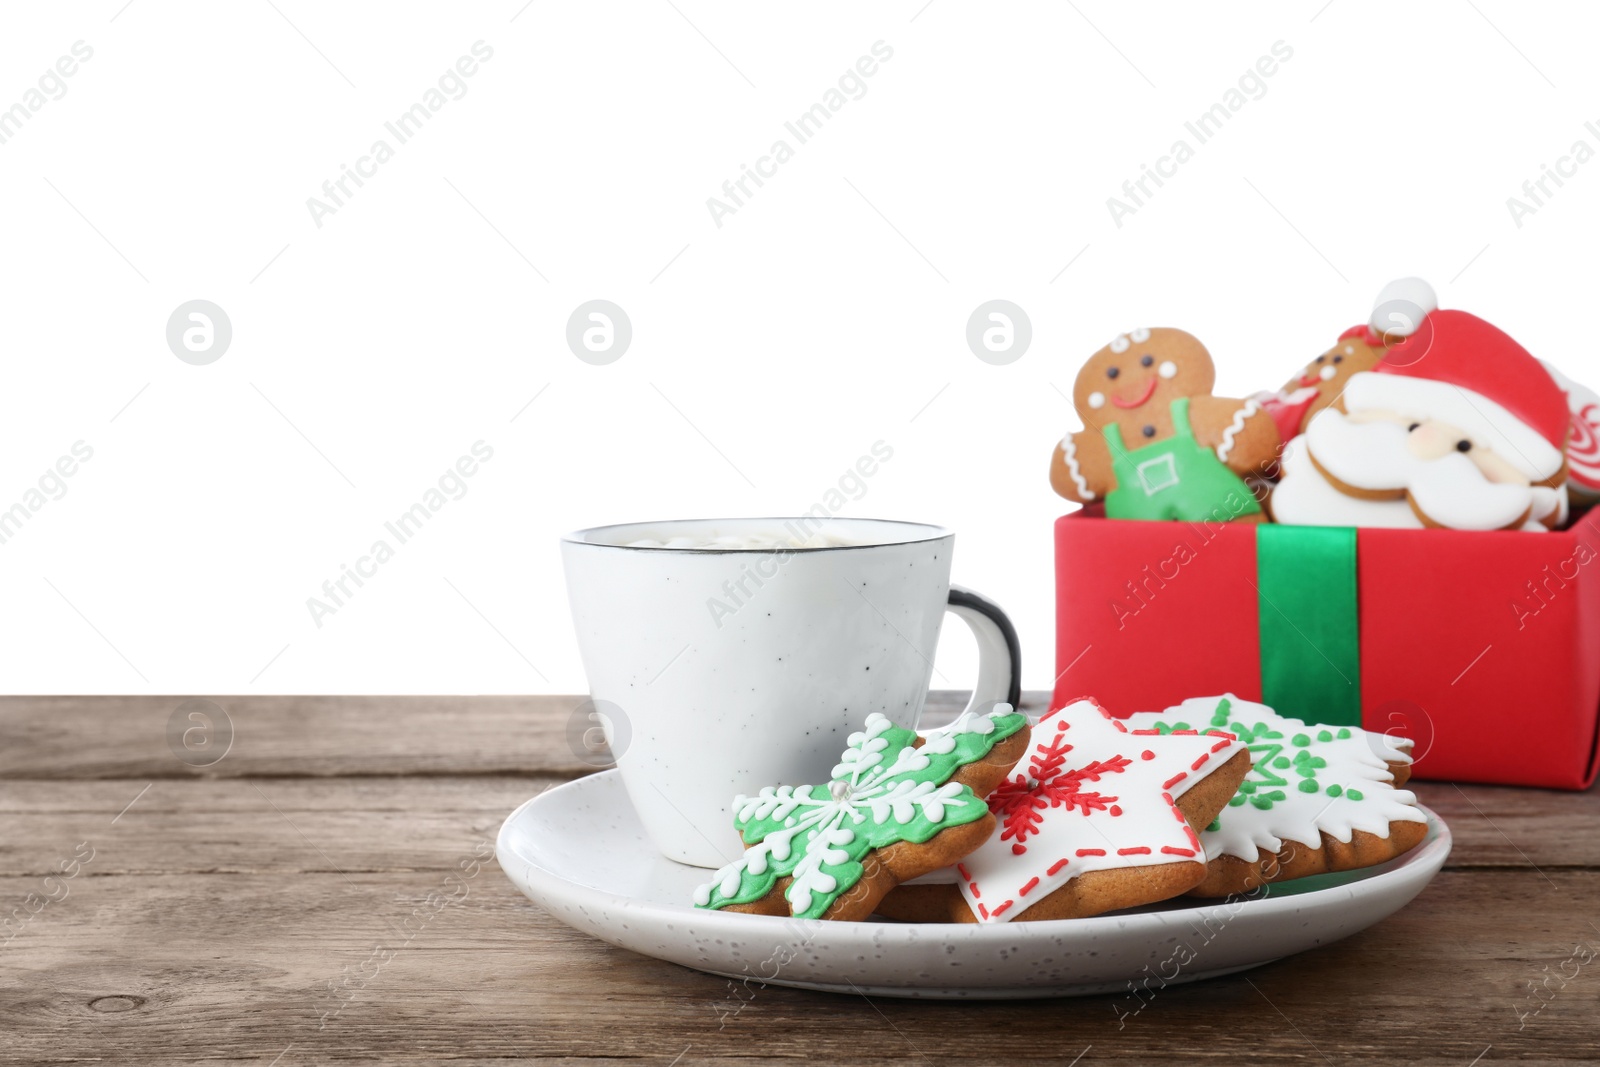 Photo of Tasty Christmas cookies and cup of delicious drink on wooden table against white background